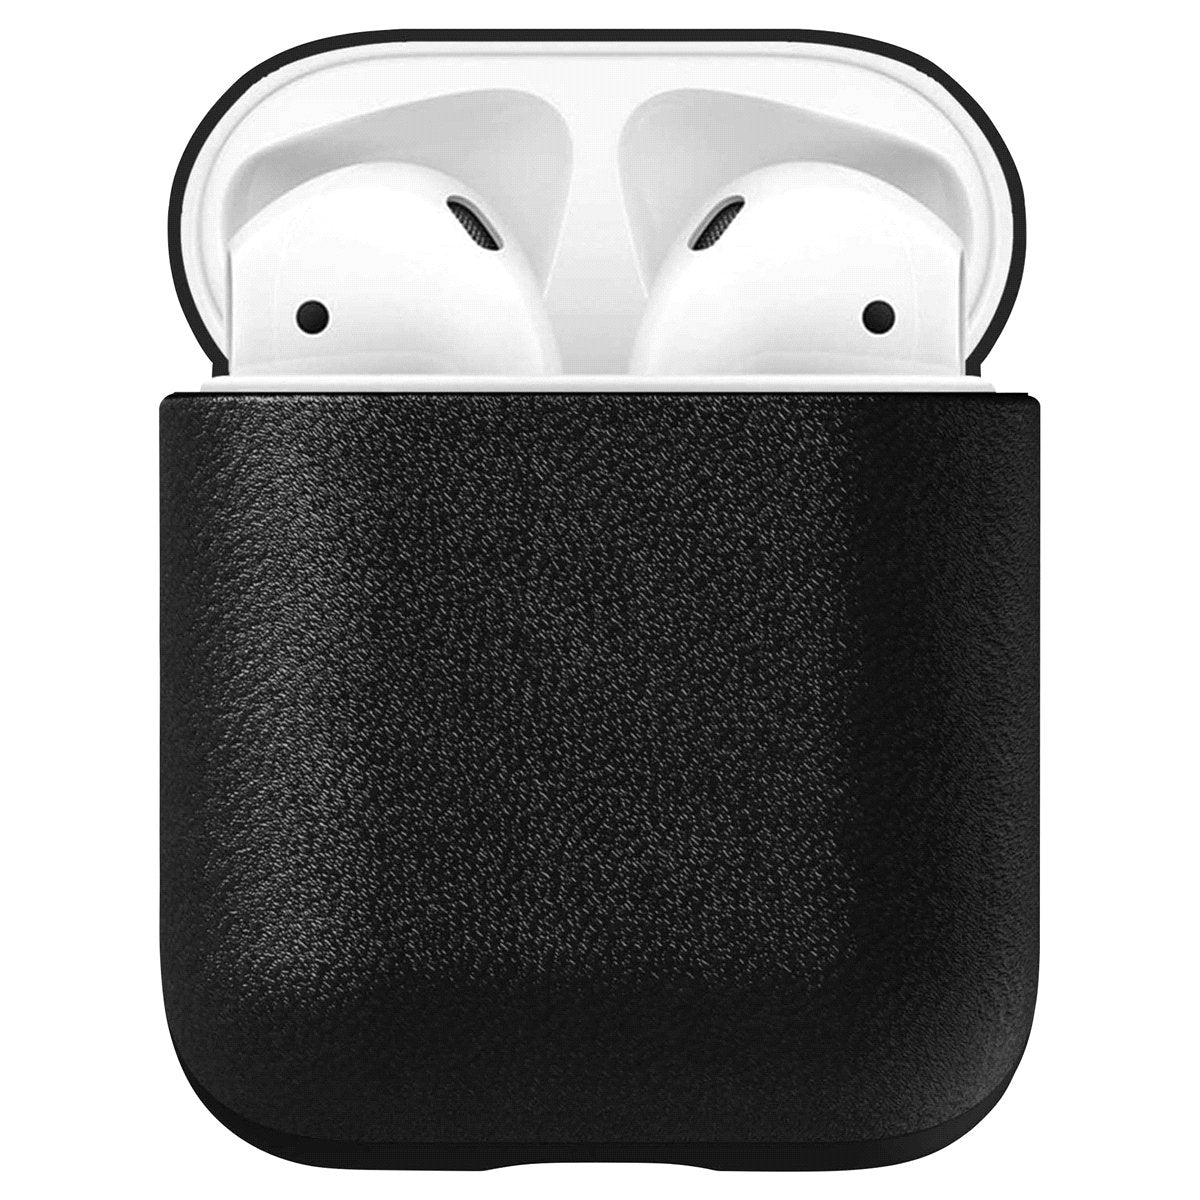 Airpods Cases